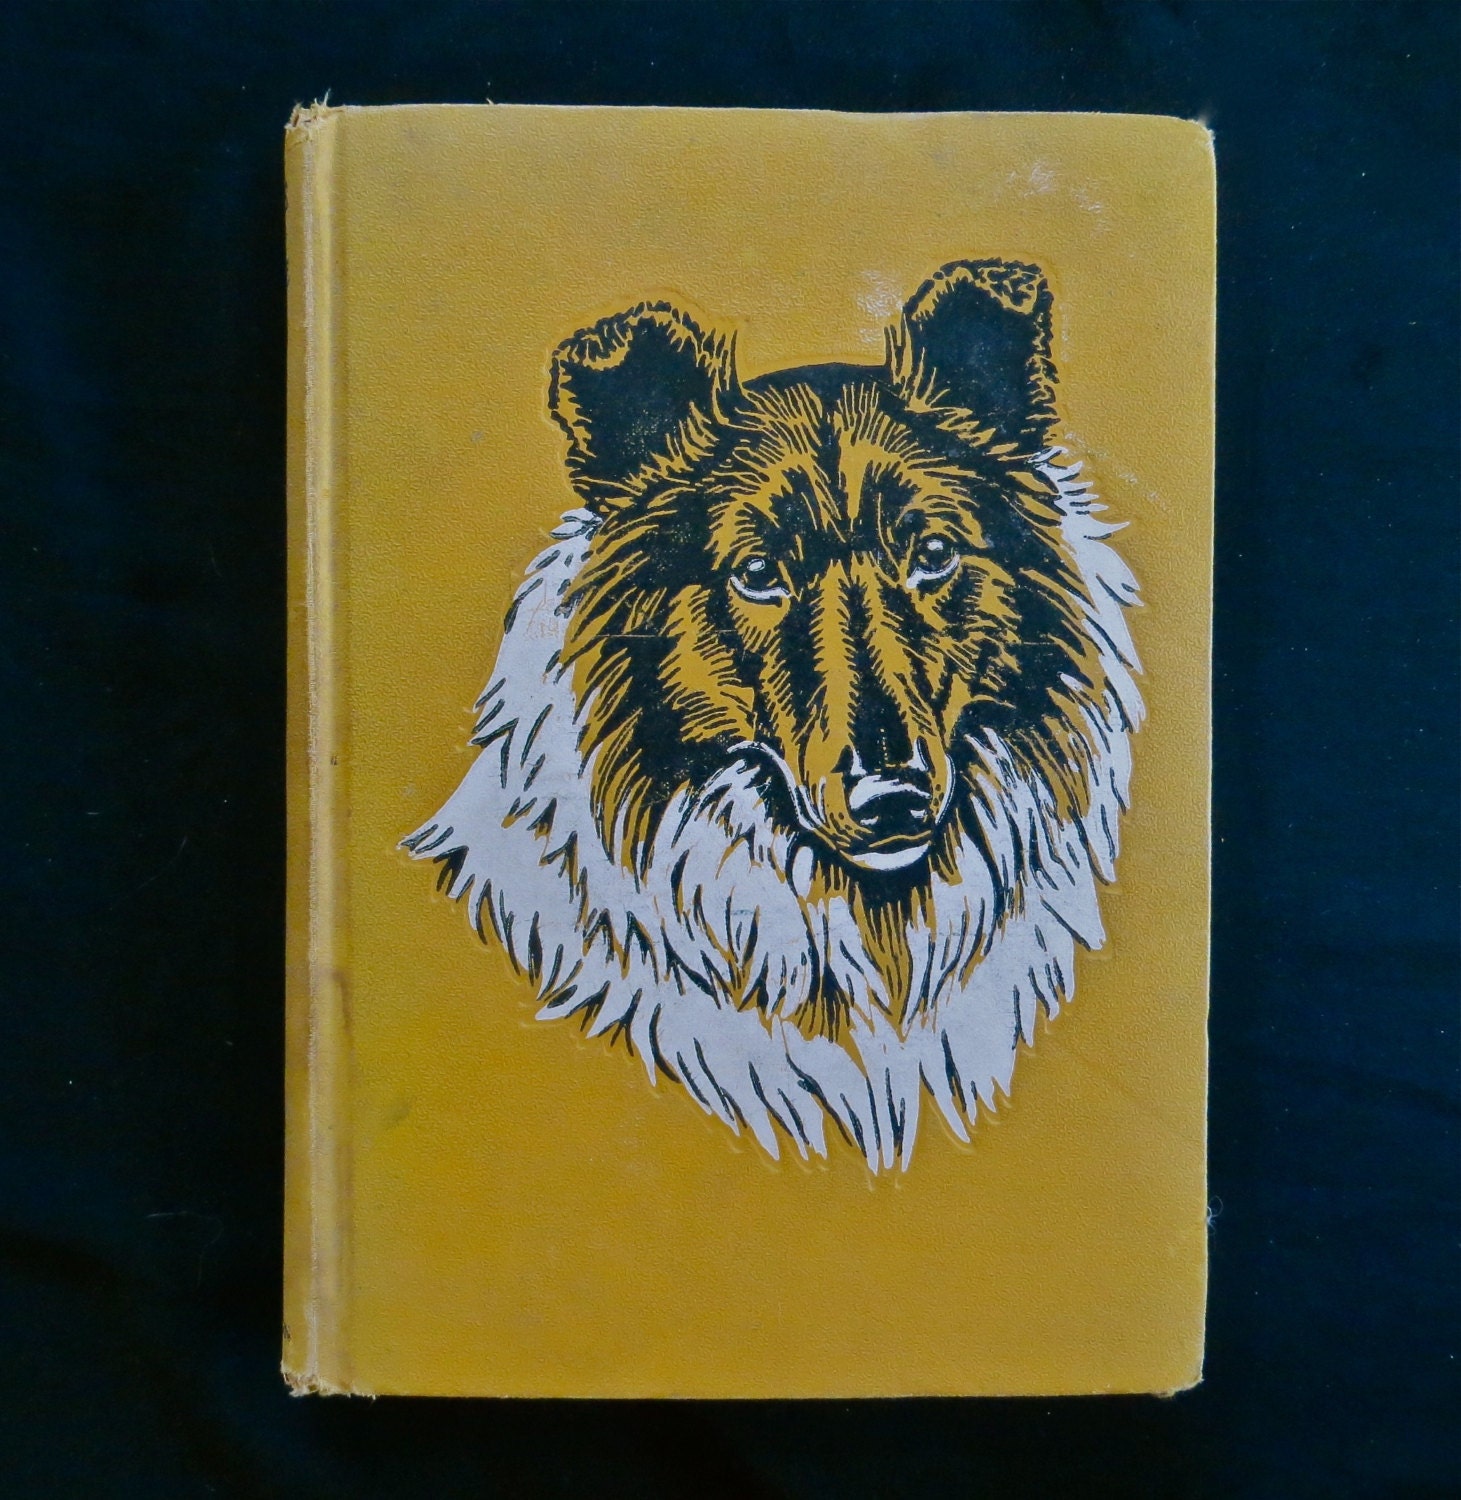 Items Similar To Vintage Lassie Come Home 1940 Famous Story Book On Etsy 